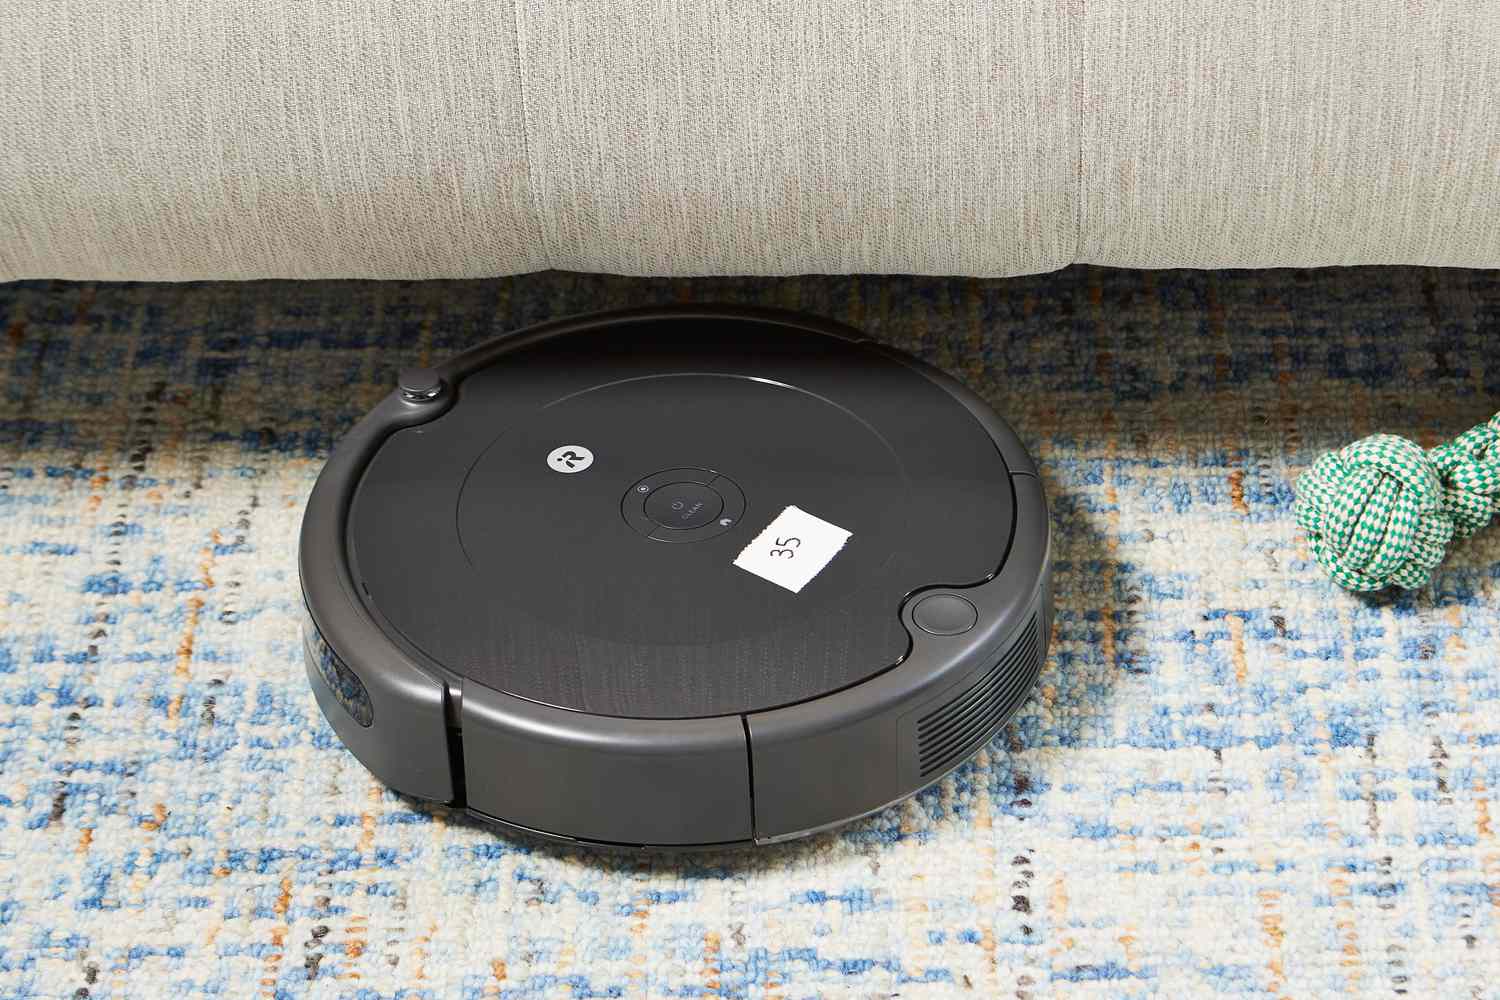 iRobot Roomba 694 Robot Vacuum on a rug going under couch with dog toy on floor